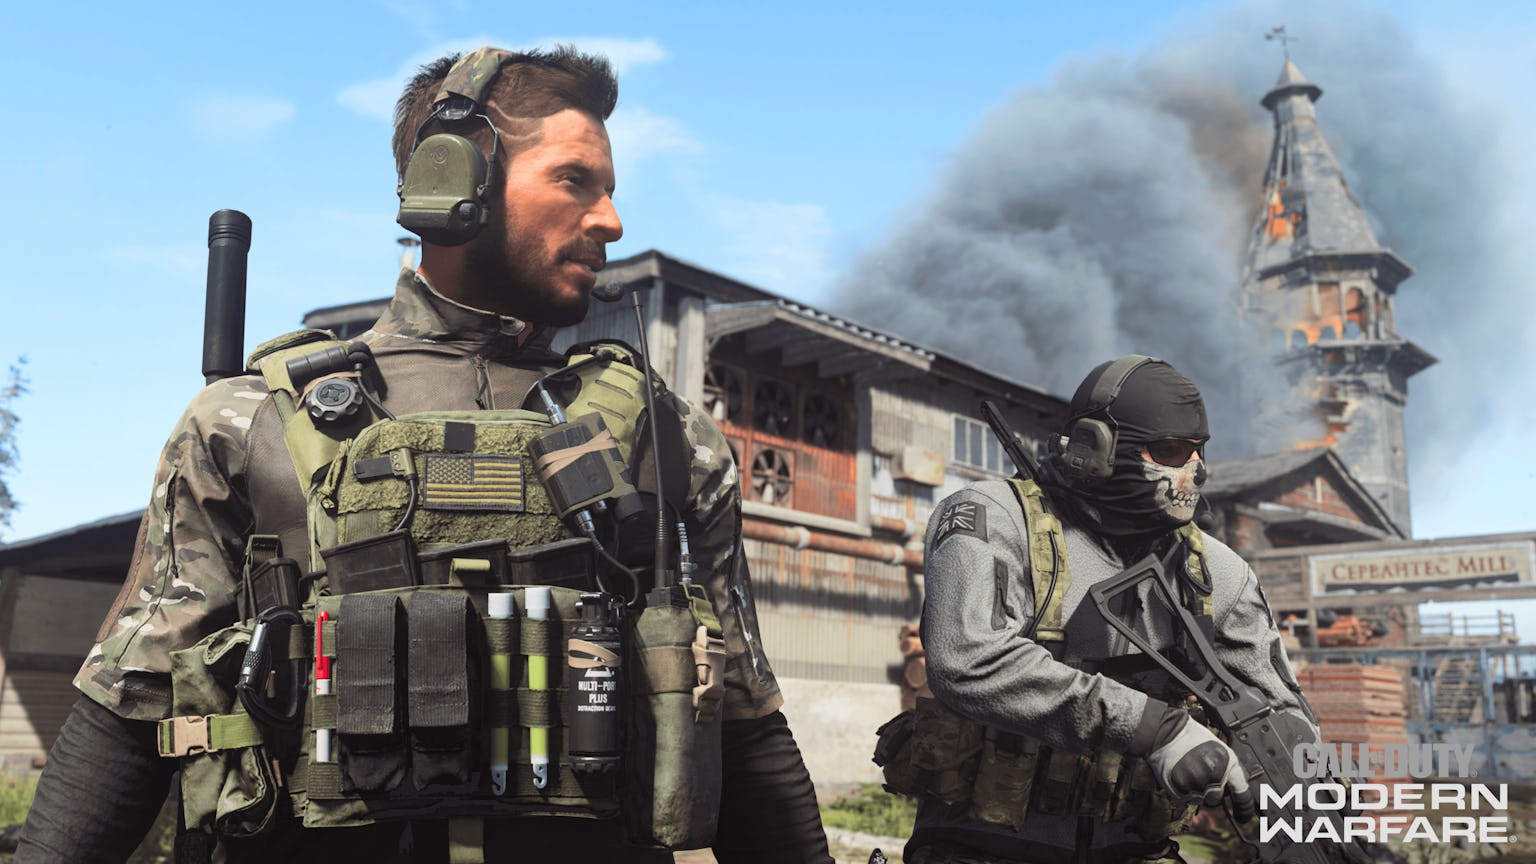 'Call of Duty' Season 4 start date and time Datamine suggests it's soon